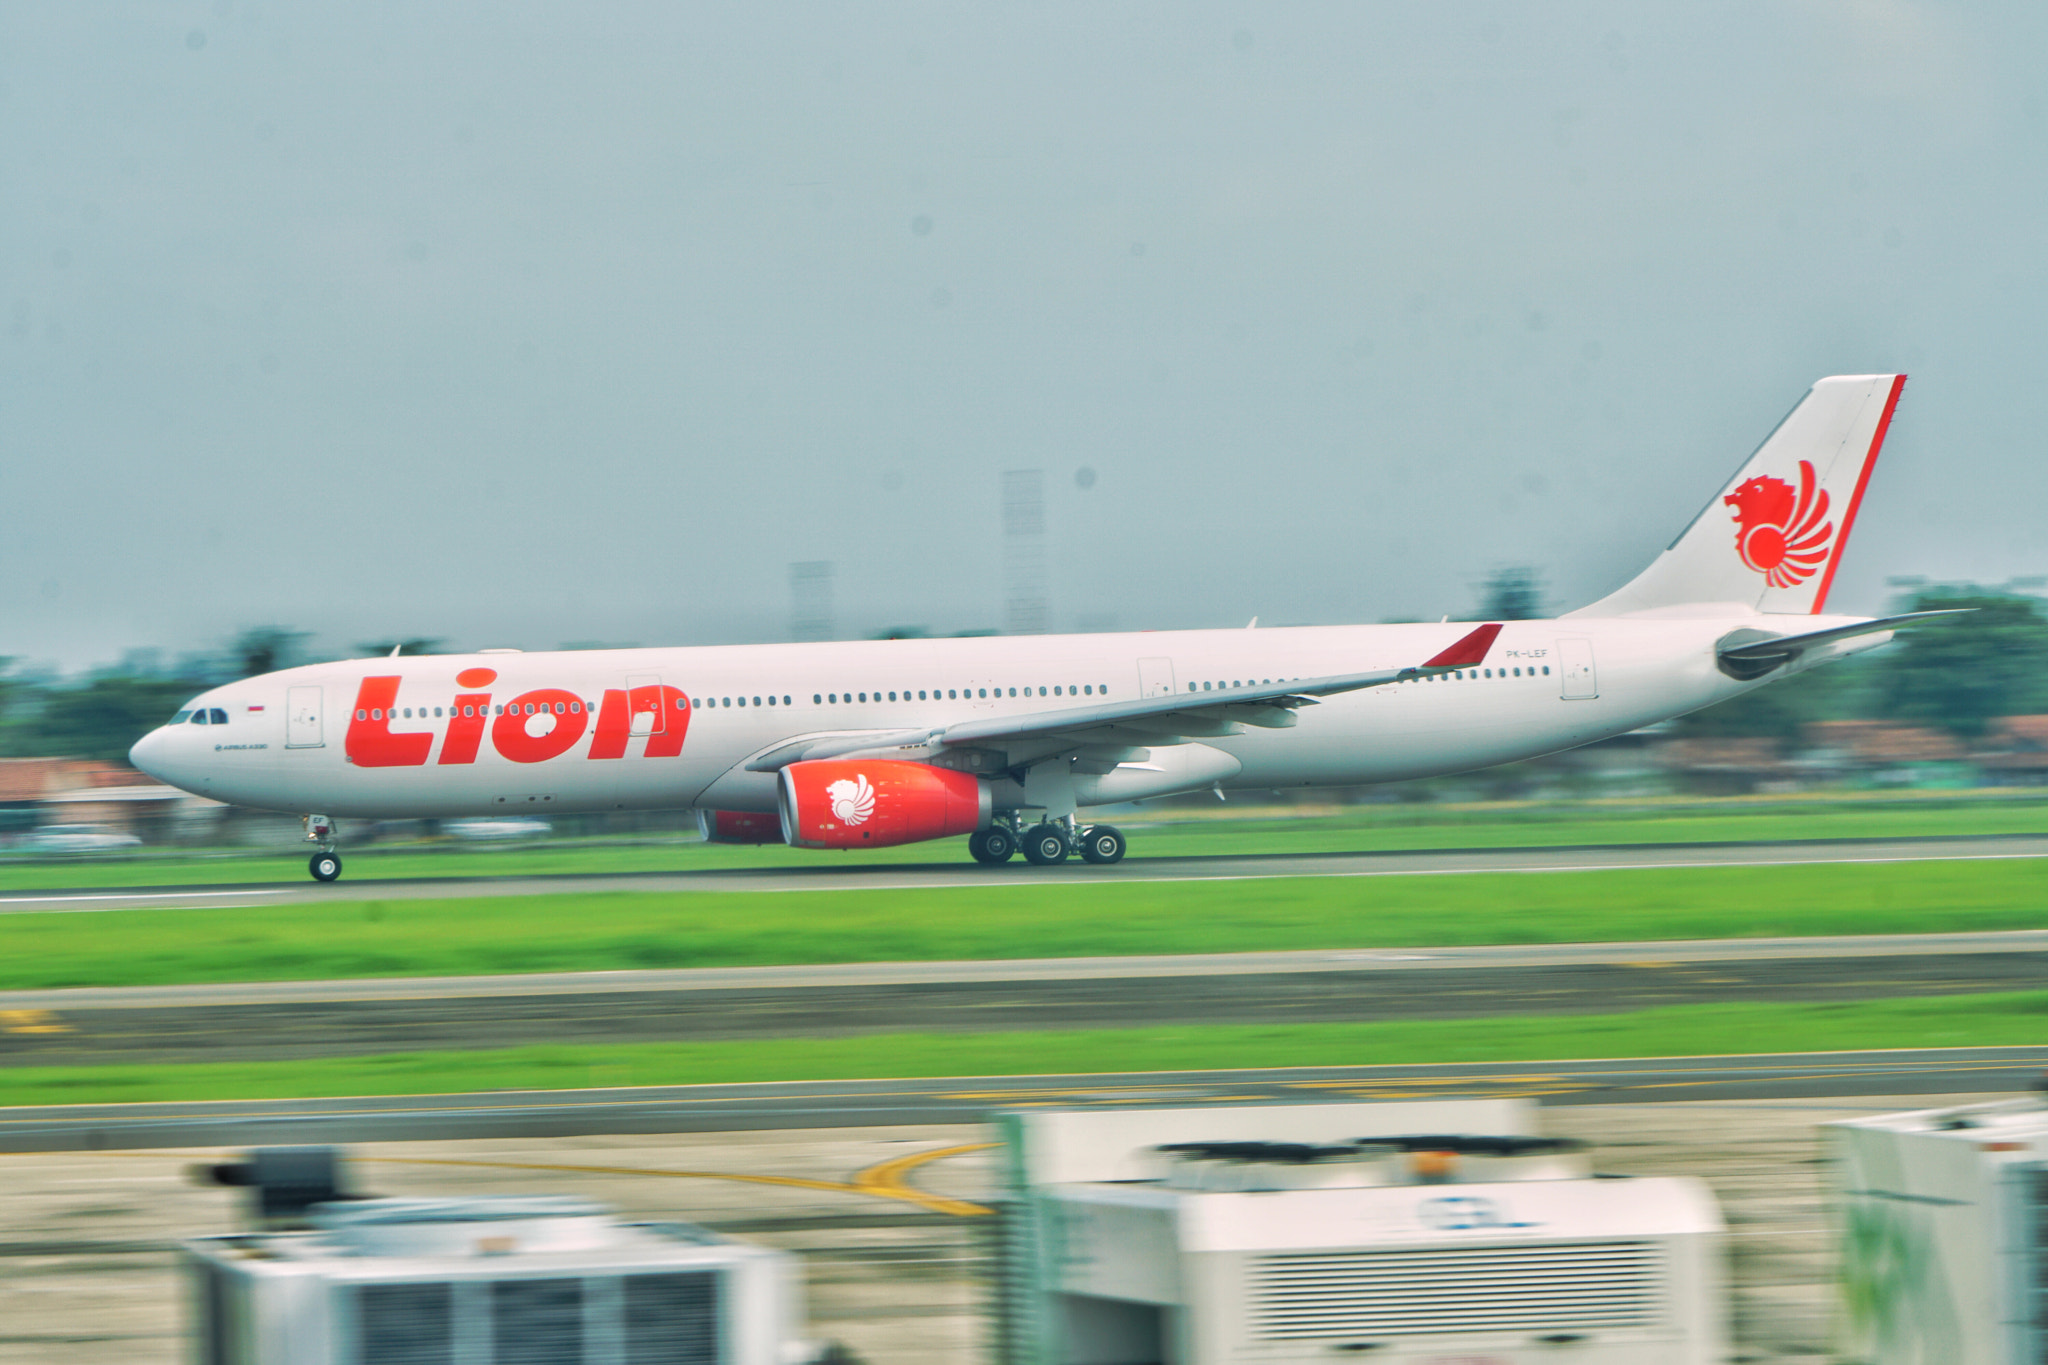 Sony a6300 sample photo. Lion air, airbus a330-300, pk-lef photography